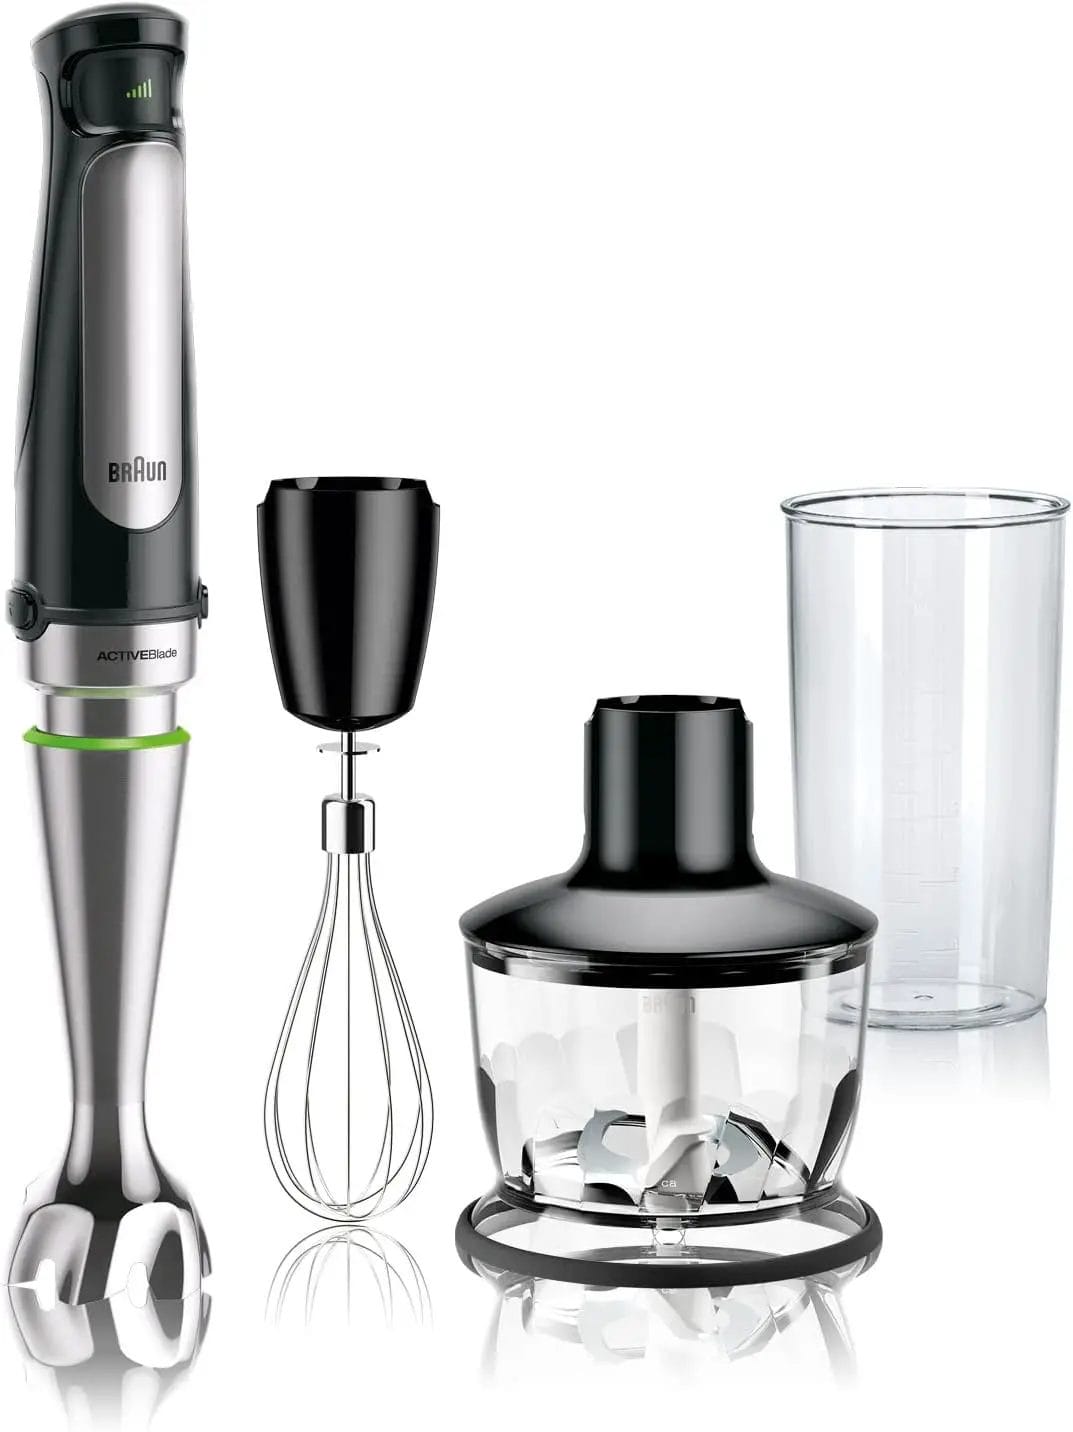 Braun MQ7035X 3-in-1 Immersion Hand, Powerful 500W Stainless Steel Stick Blender Variable Speed + 2-Cup Food Processor, Whisk, Beaker, Faster, Finer Blending, MultiQuick